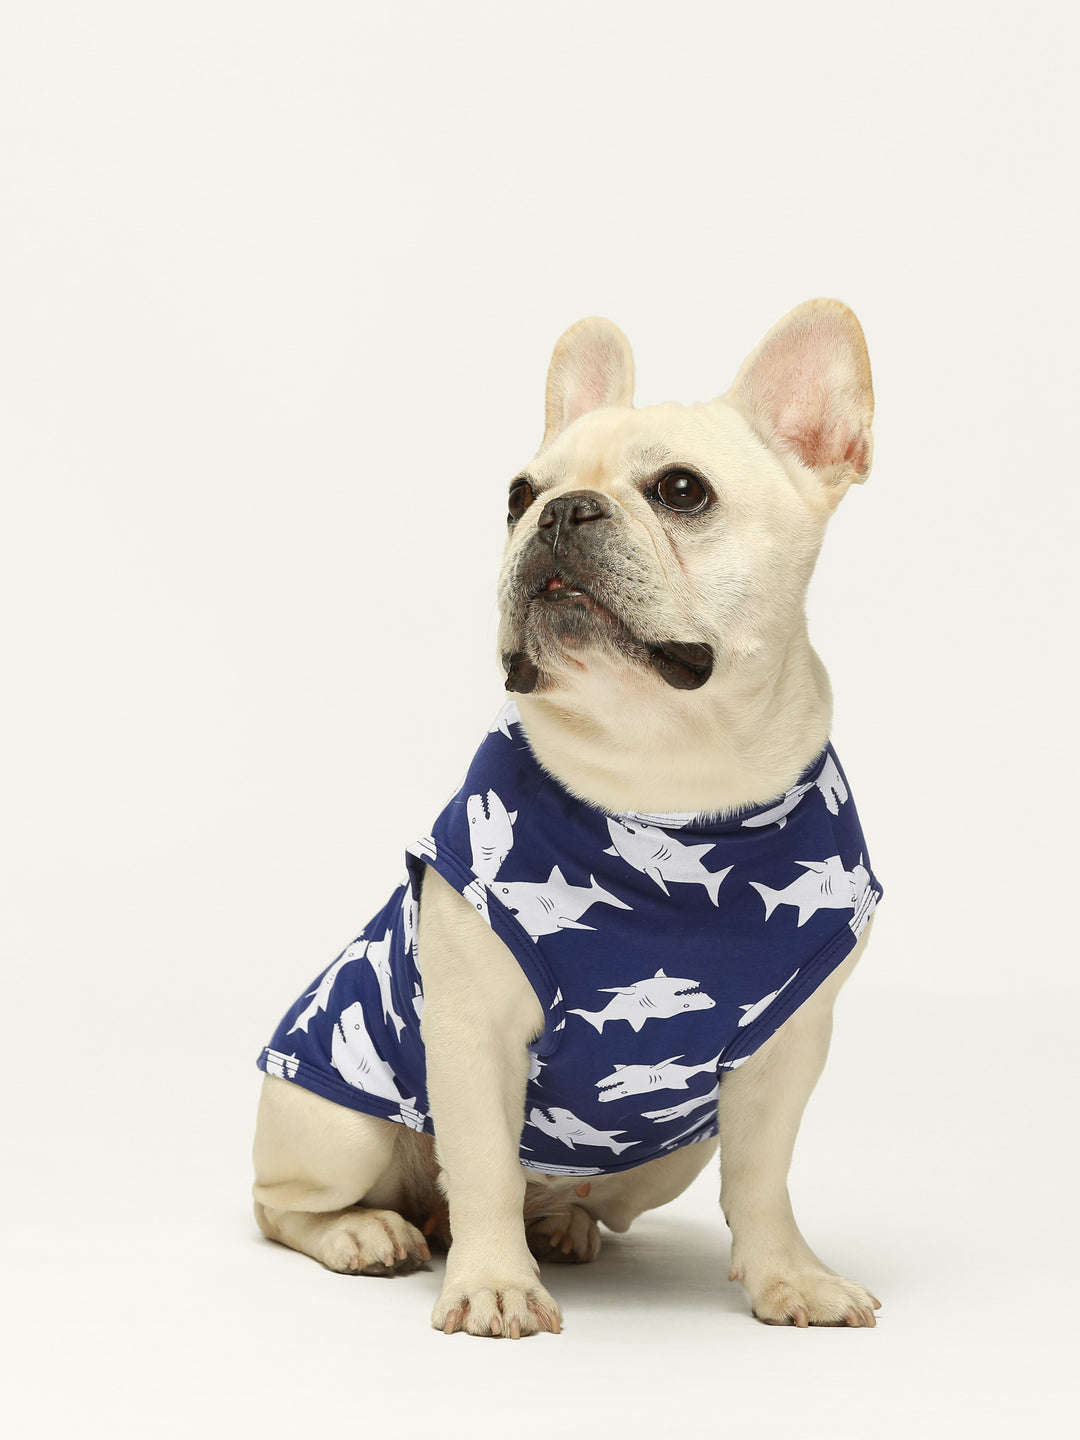 Calling All Shark Enthusiasts: Which Dog Shark Costume Will Make a Splash?